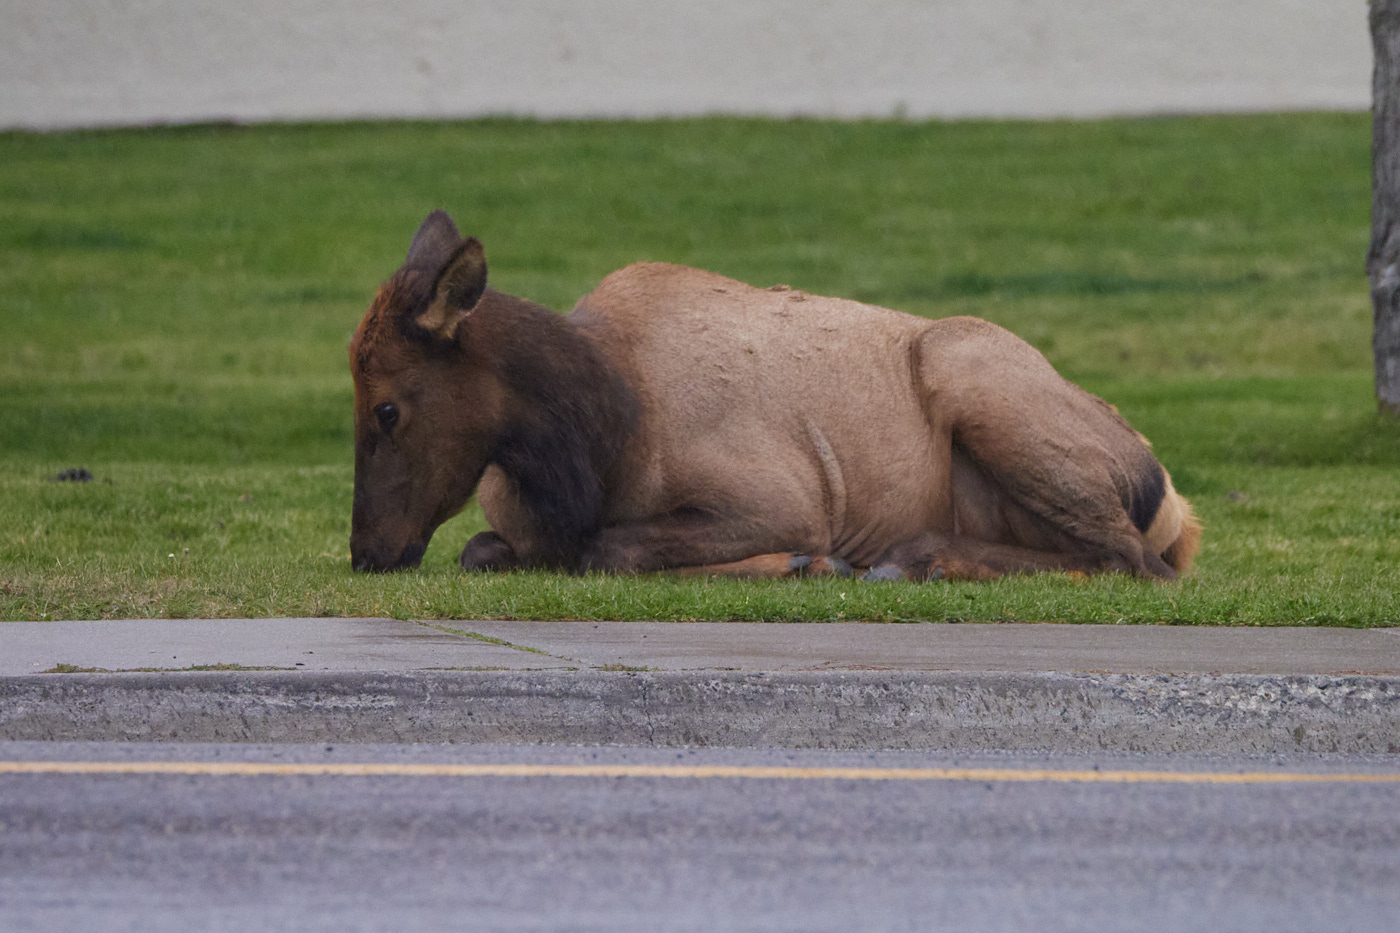 Nothing more idyllic than munching grass right next to the road.